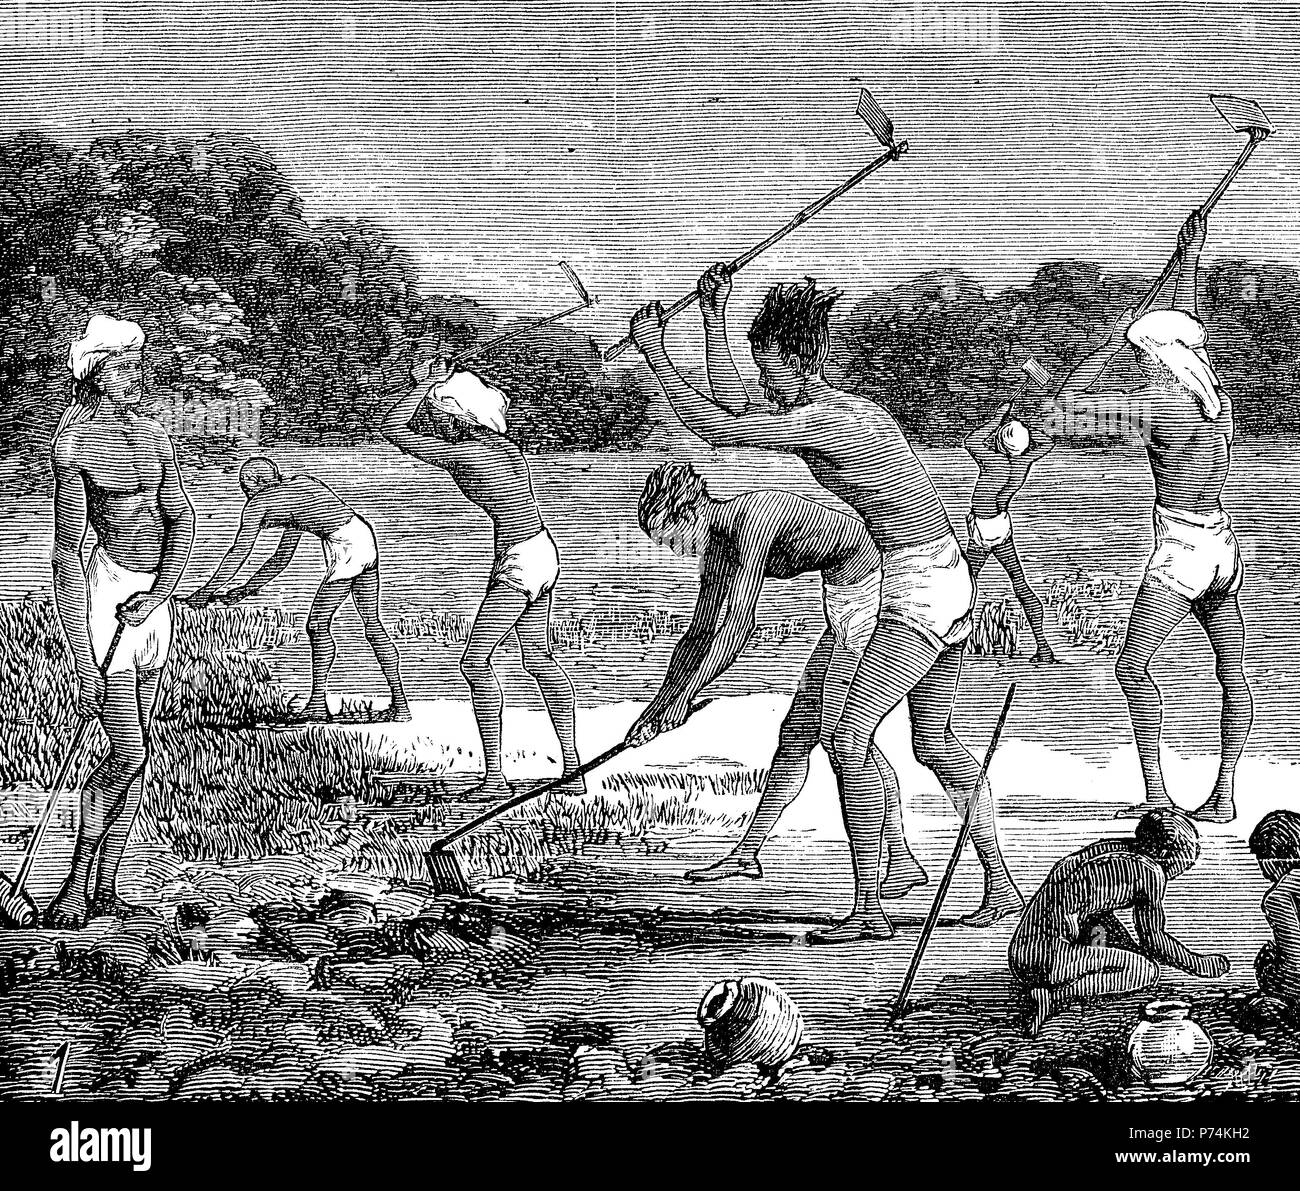 Indigo cultivation in Tirhoot, Bengal. Digging out the stumps after the harvest, India, digital improved reproduction from an original print from the year 1881 Stock Photo